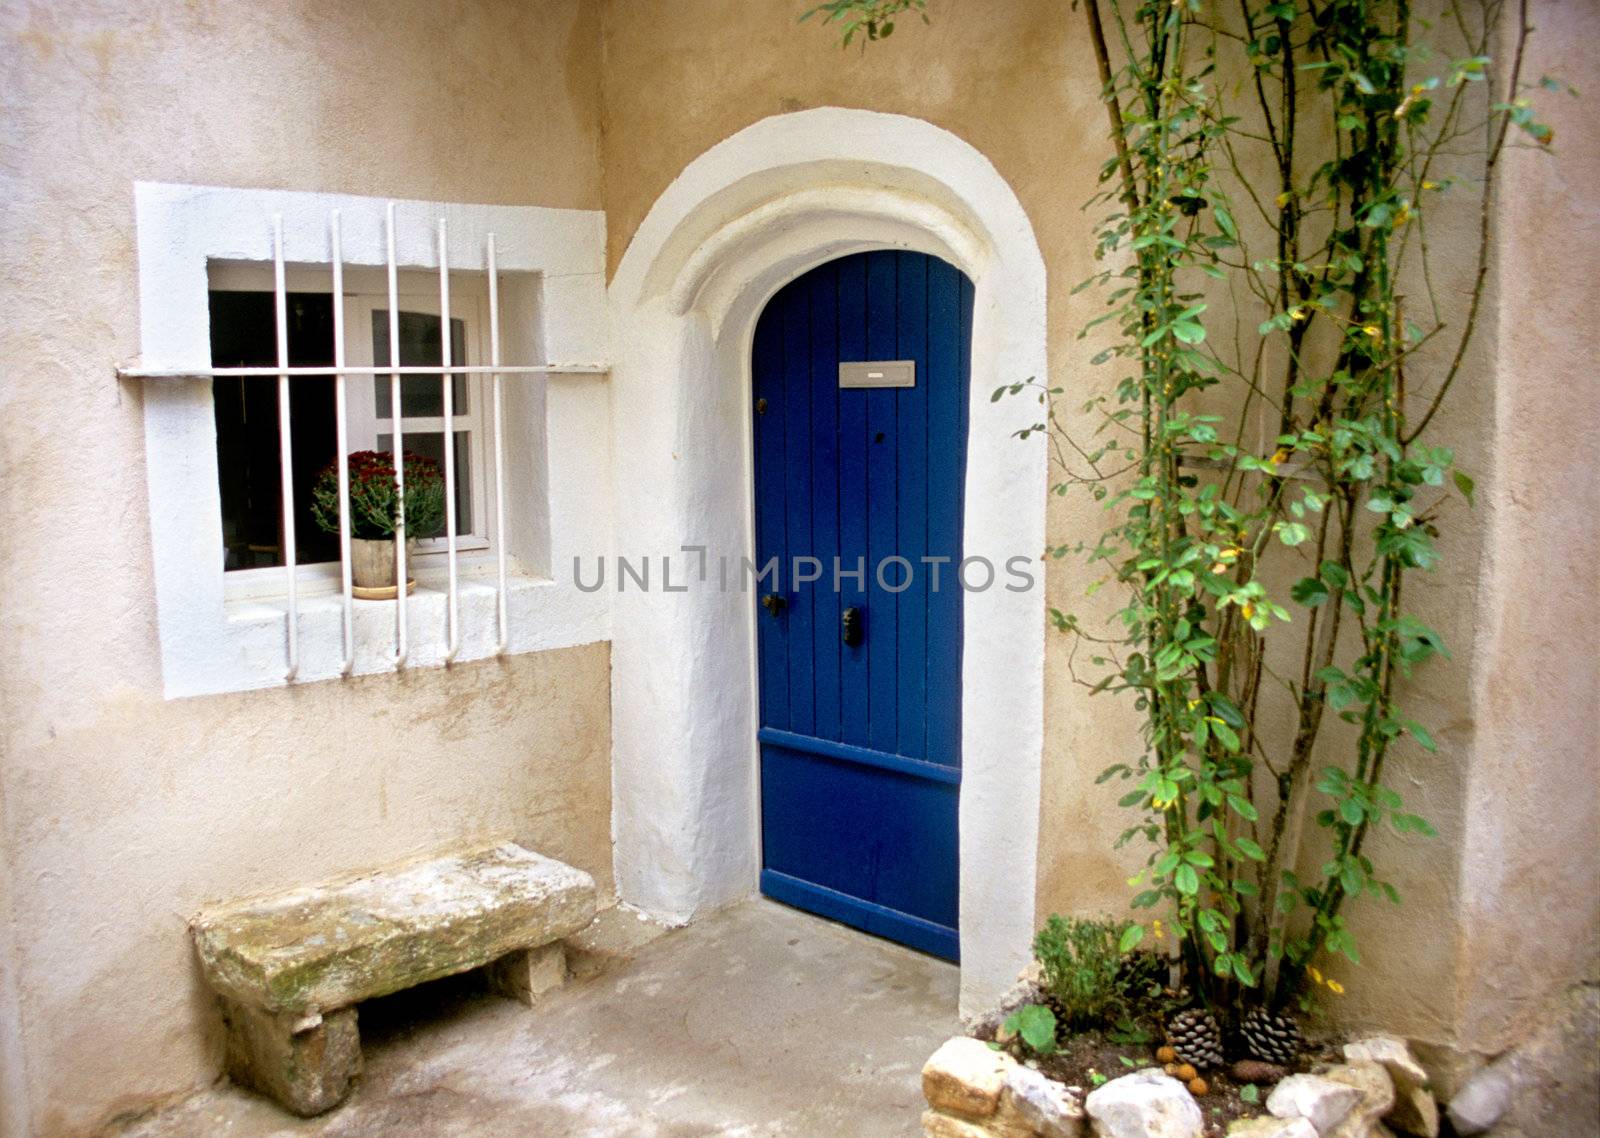 A bright blue door welcomes visitors to a home in the provence region of France.